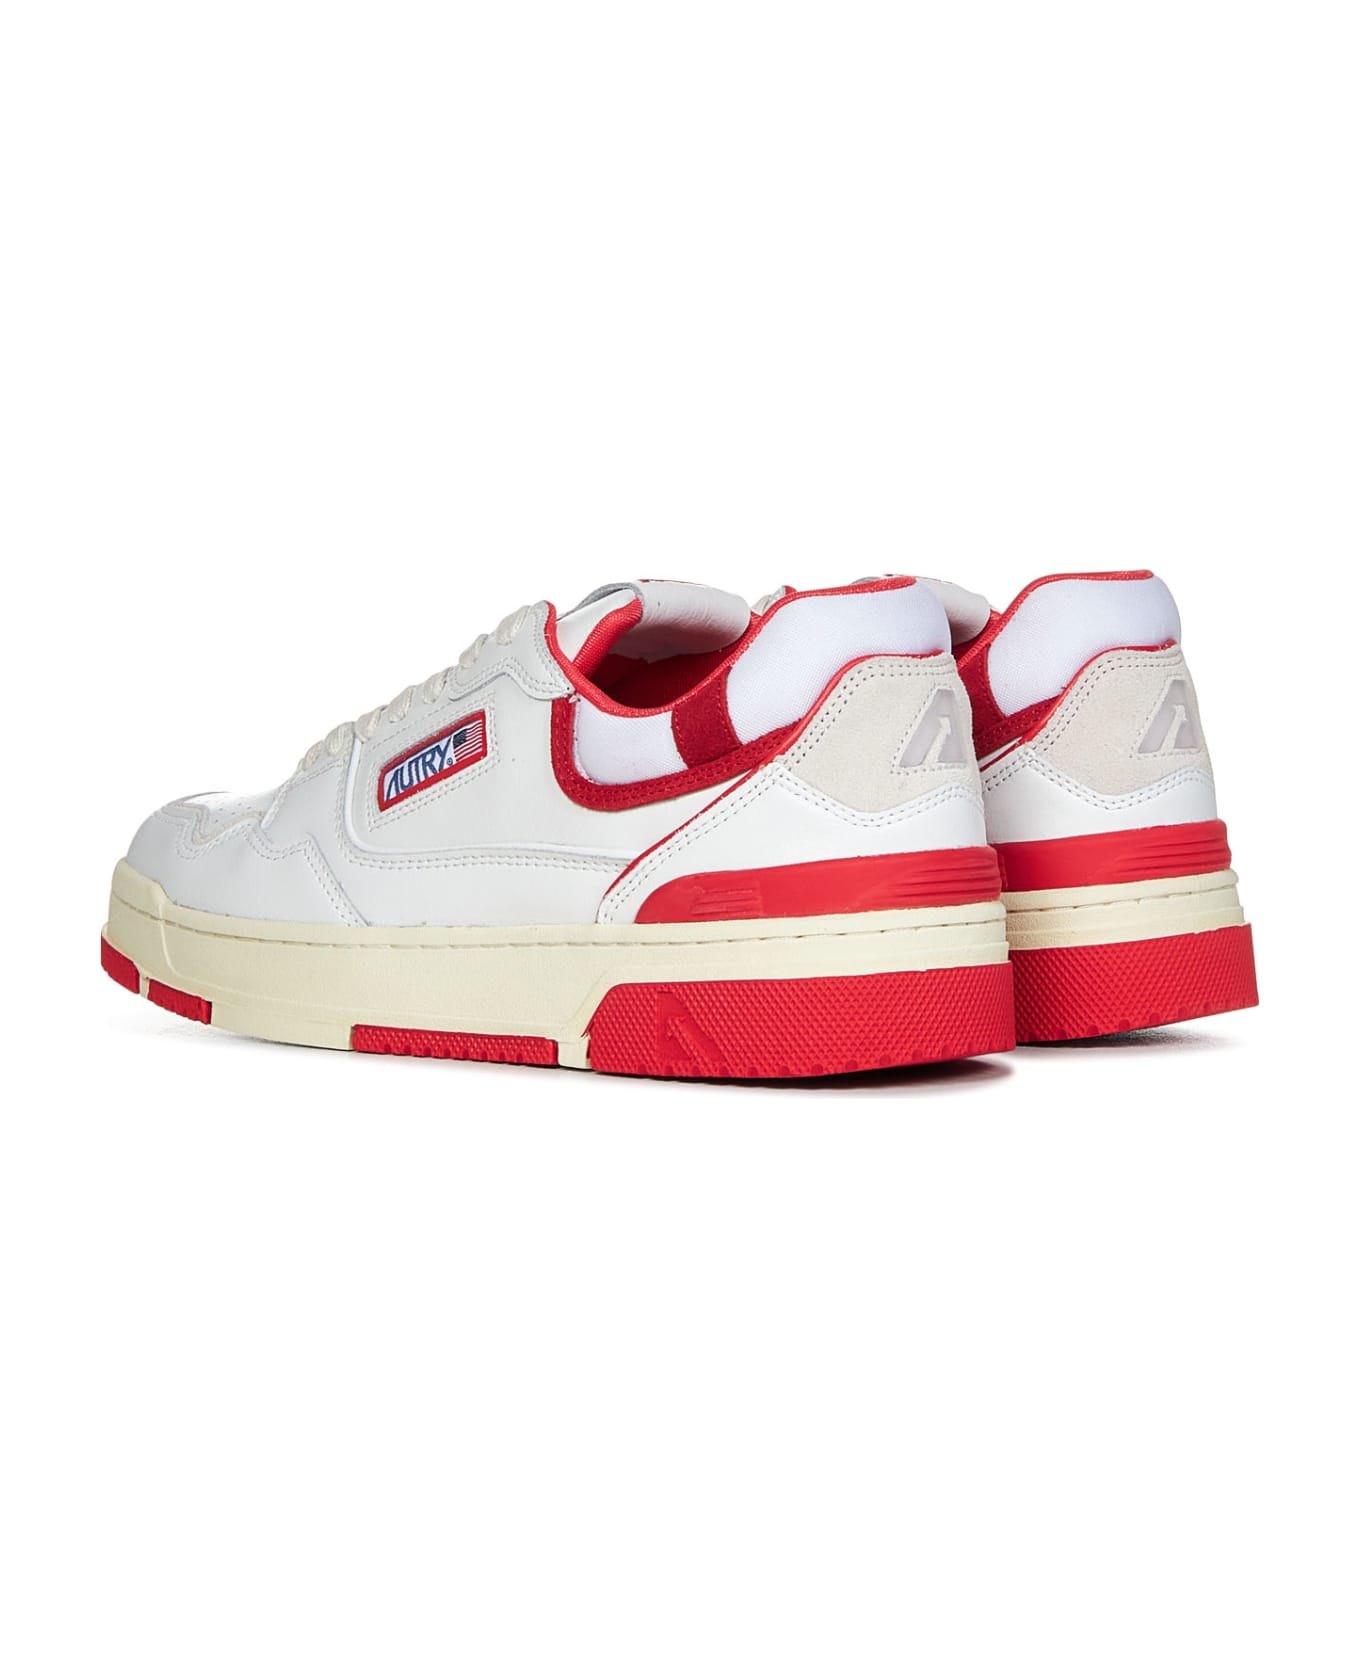 Autry Clc Sneakers - White